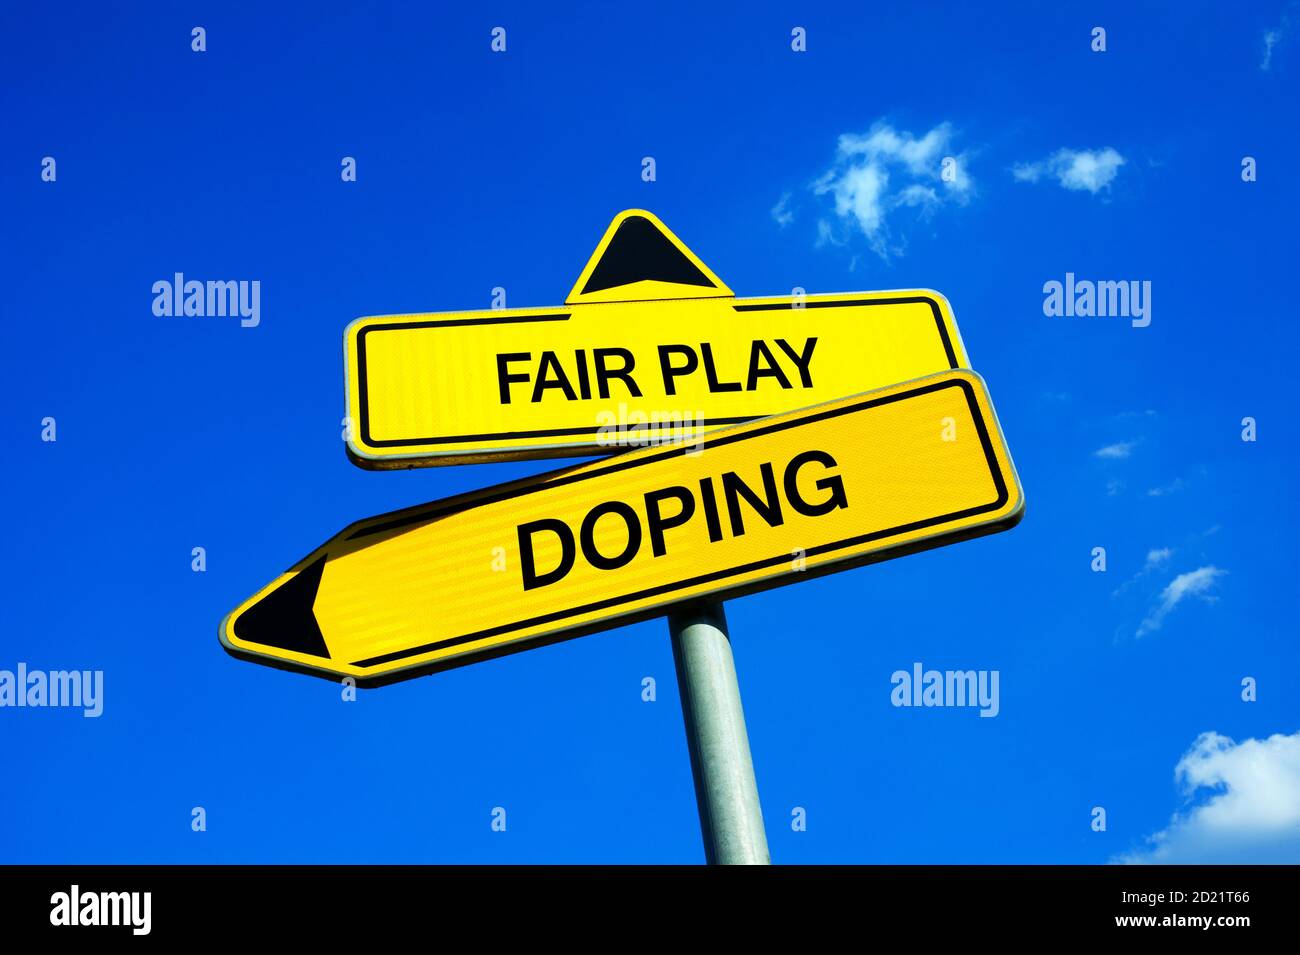 Fair Play vs Doping - Traffic sign with two options - fairness of sportsmen during sport competitions or illegal using of drugs and stimulates to enha Stock Photo